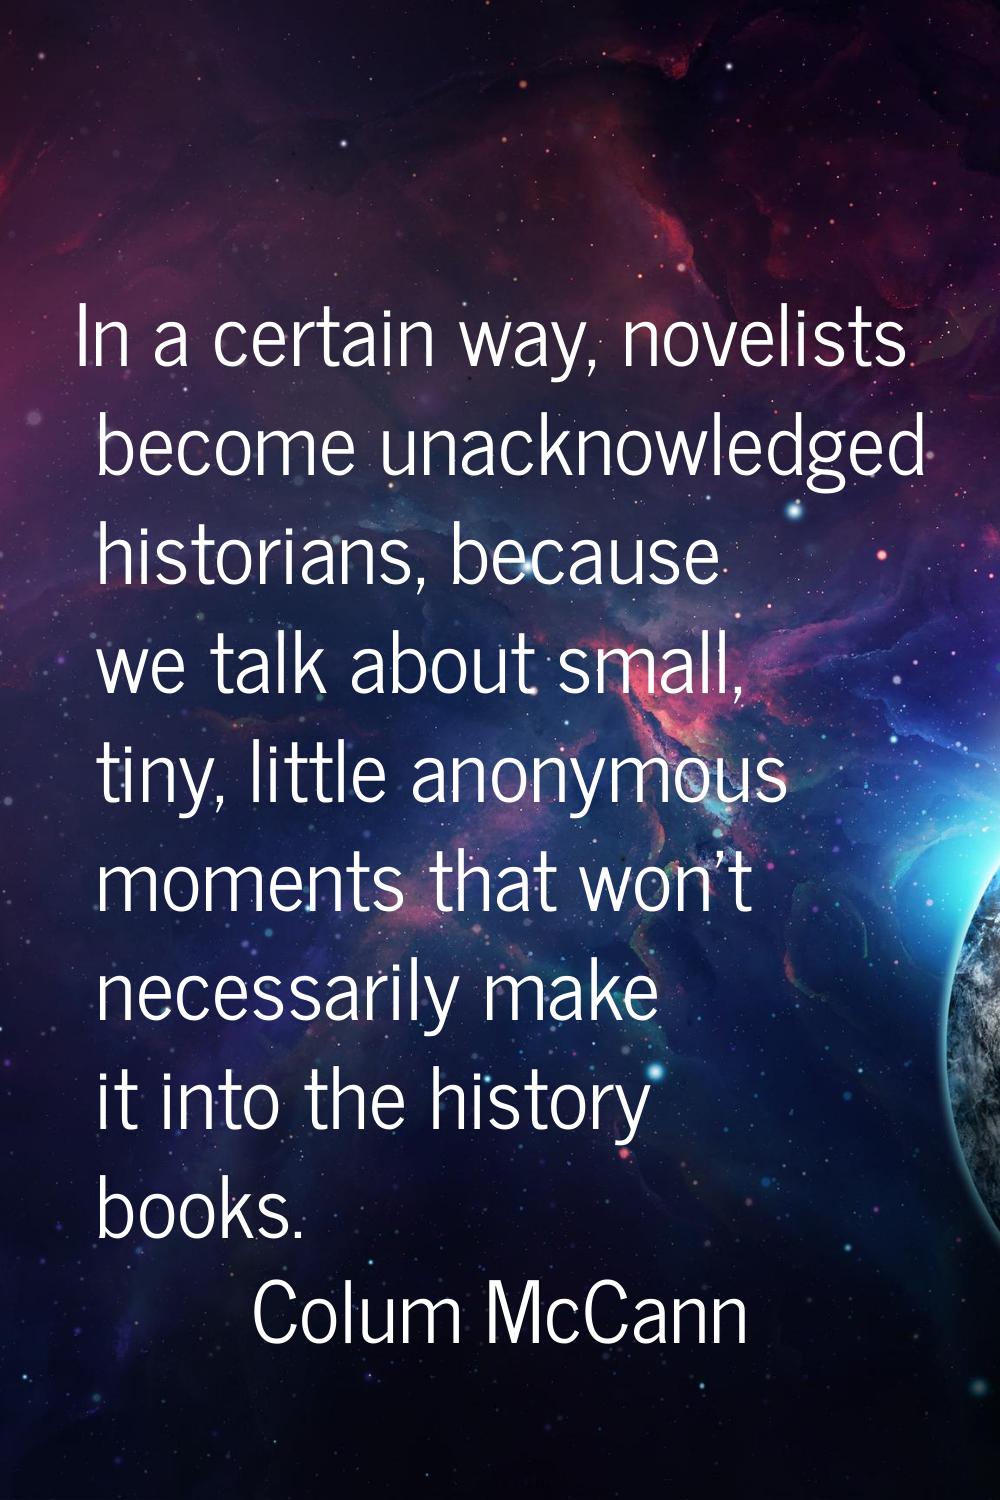 In a certain way, novelists become unacknowledged historians, because we talk about small, tiny, li